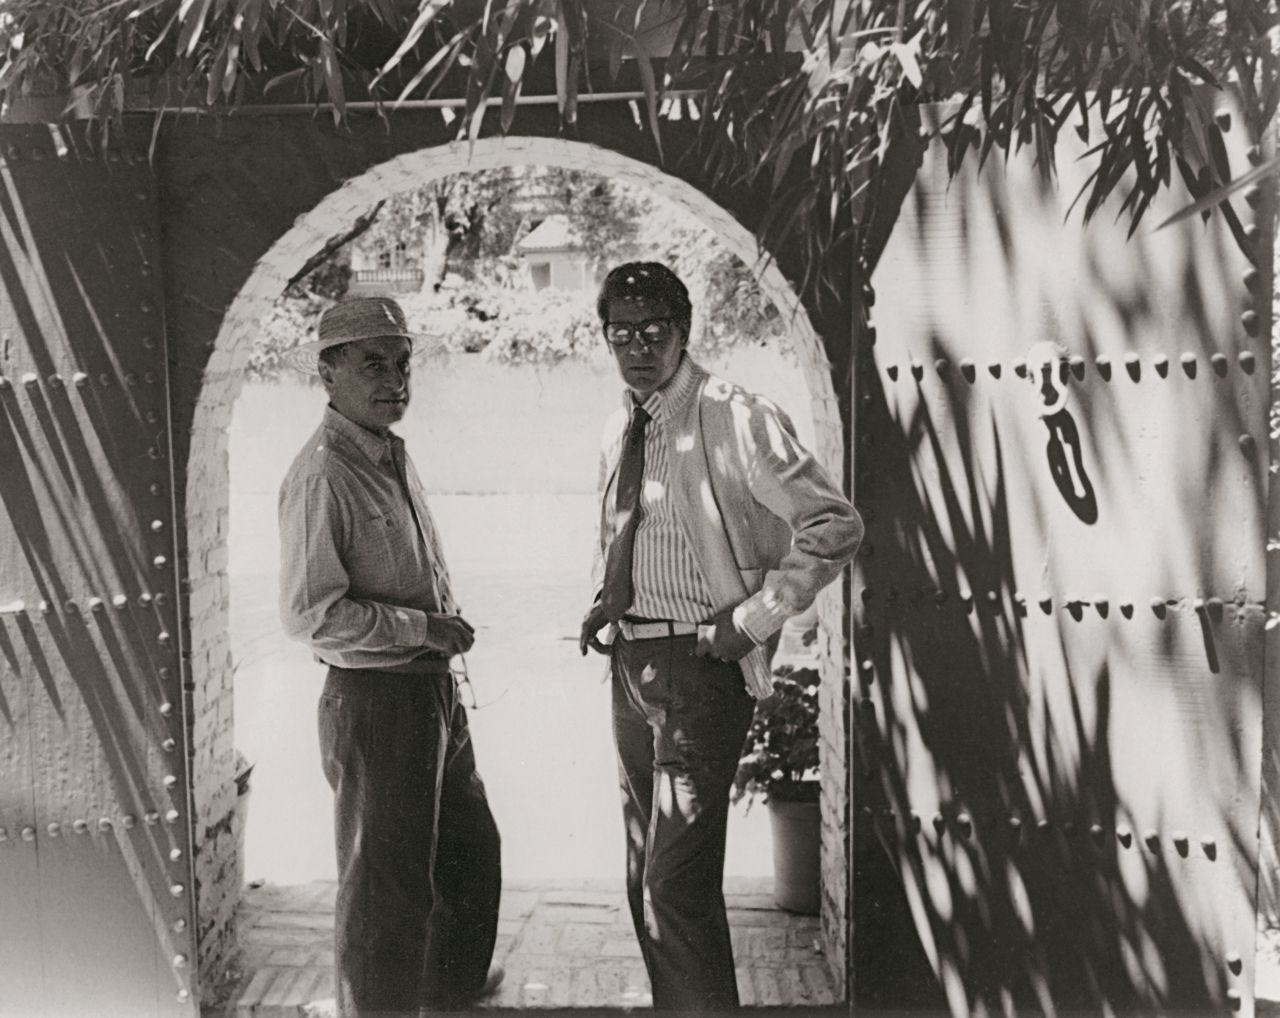 Pierre Berge and Yves Saint Laurent in Marrakech. "Yves Saint Laurent and I discovered Marrakech in 1966, and we never left," says Berge. "This city deeply influenced Saint Laurent's life and work, particularly his discovery of color."